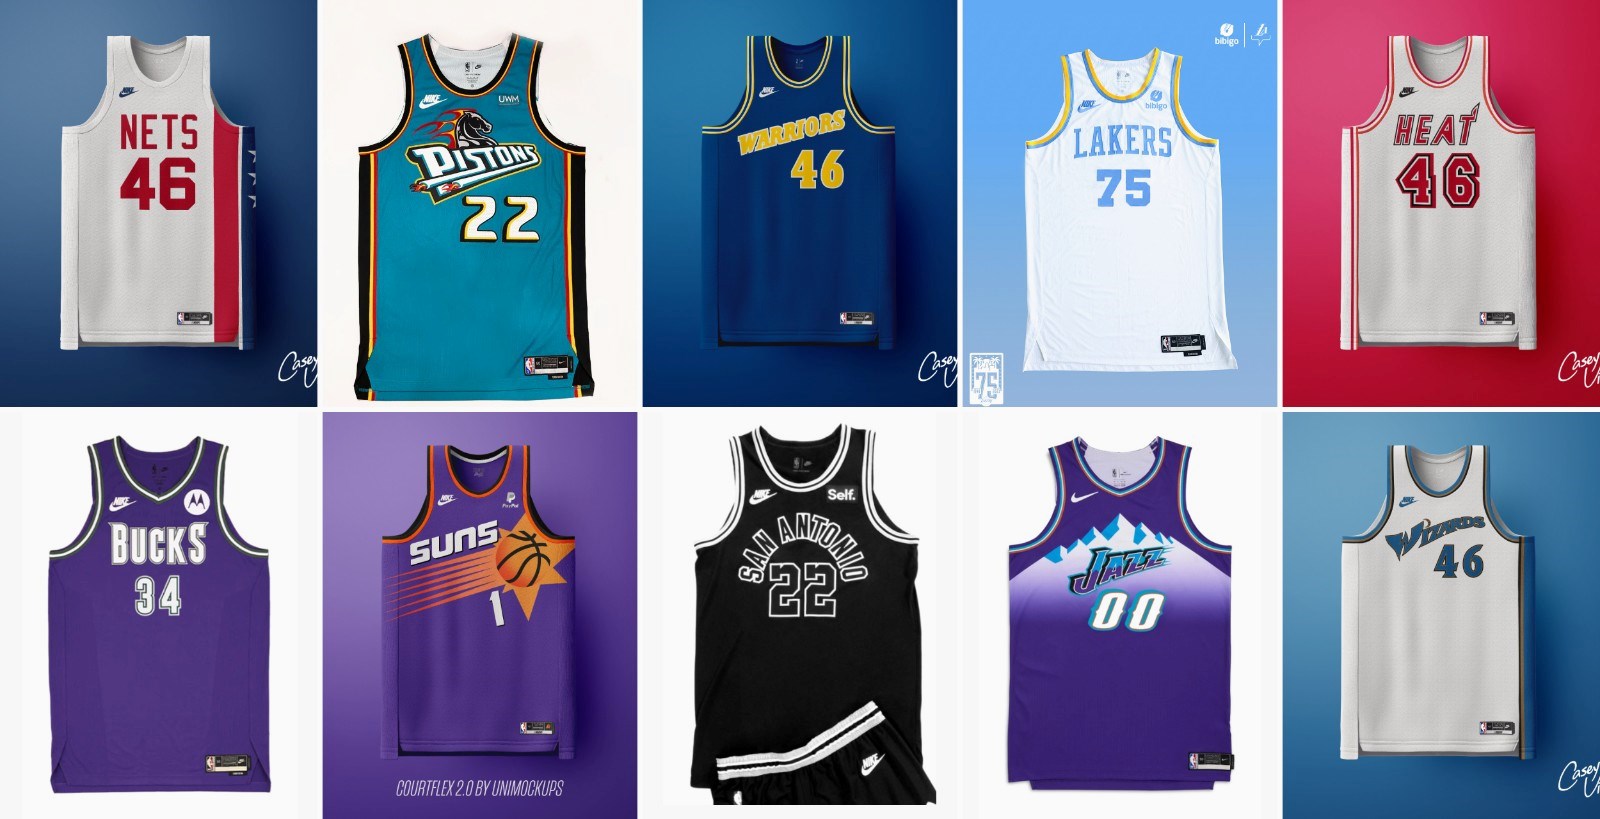 These are the new jerseys and kits for every NBA team for the 2022